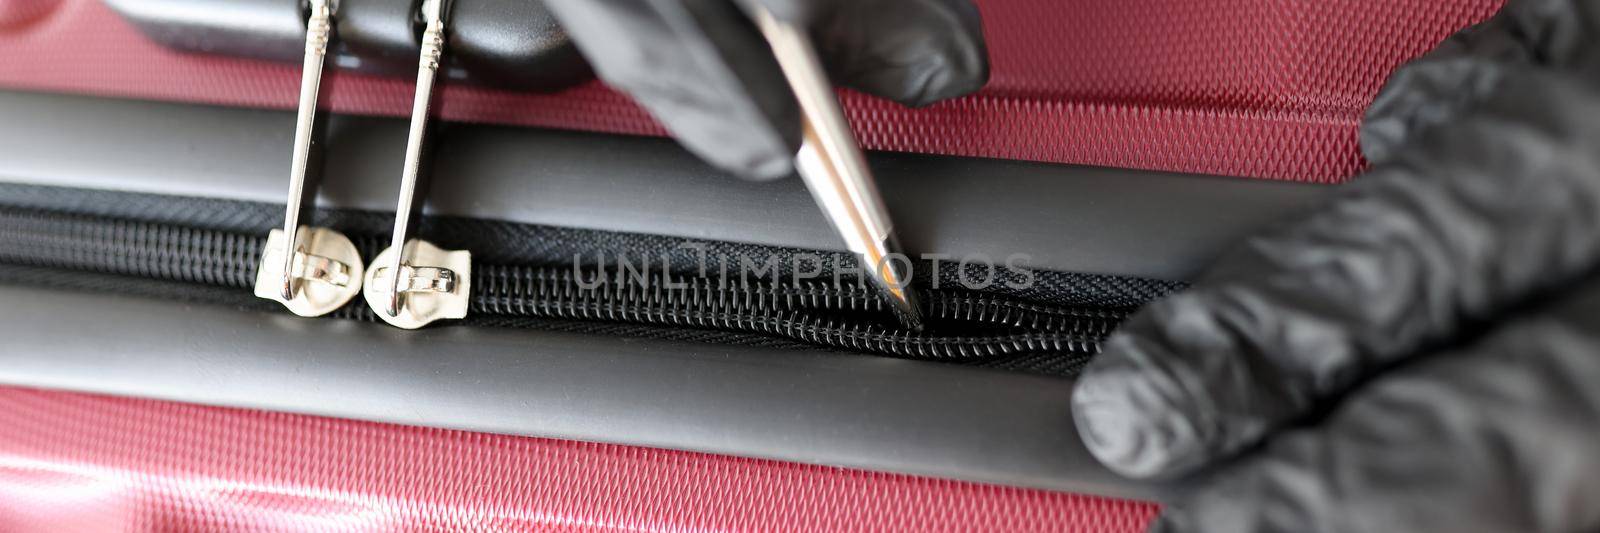 Gloved hands mending a snake on a suitcase, close-up. Shoemaker tailor tool for repairing snake on bags and clothes, tailor shop